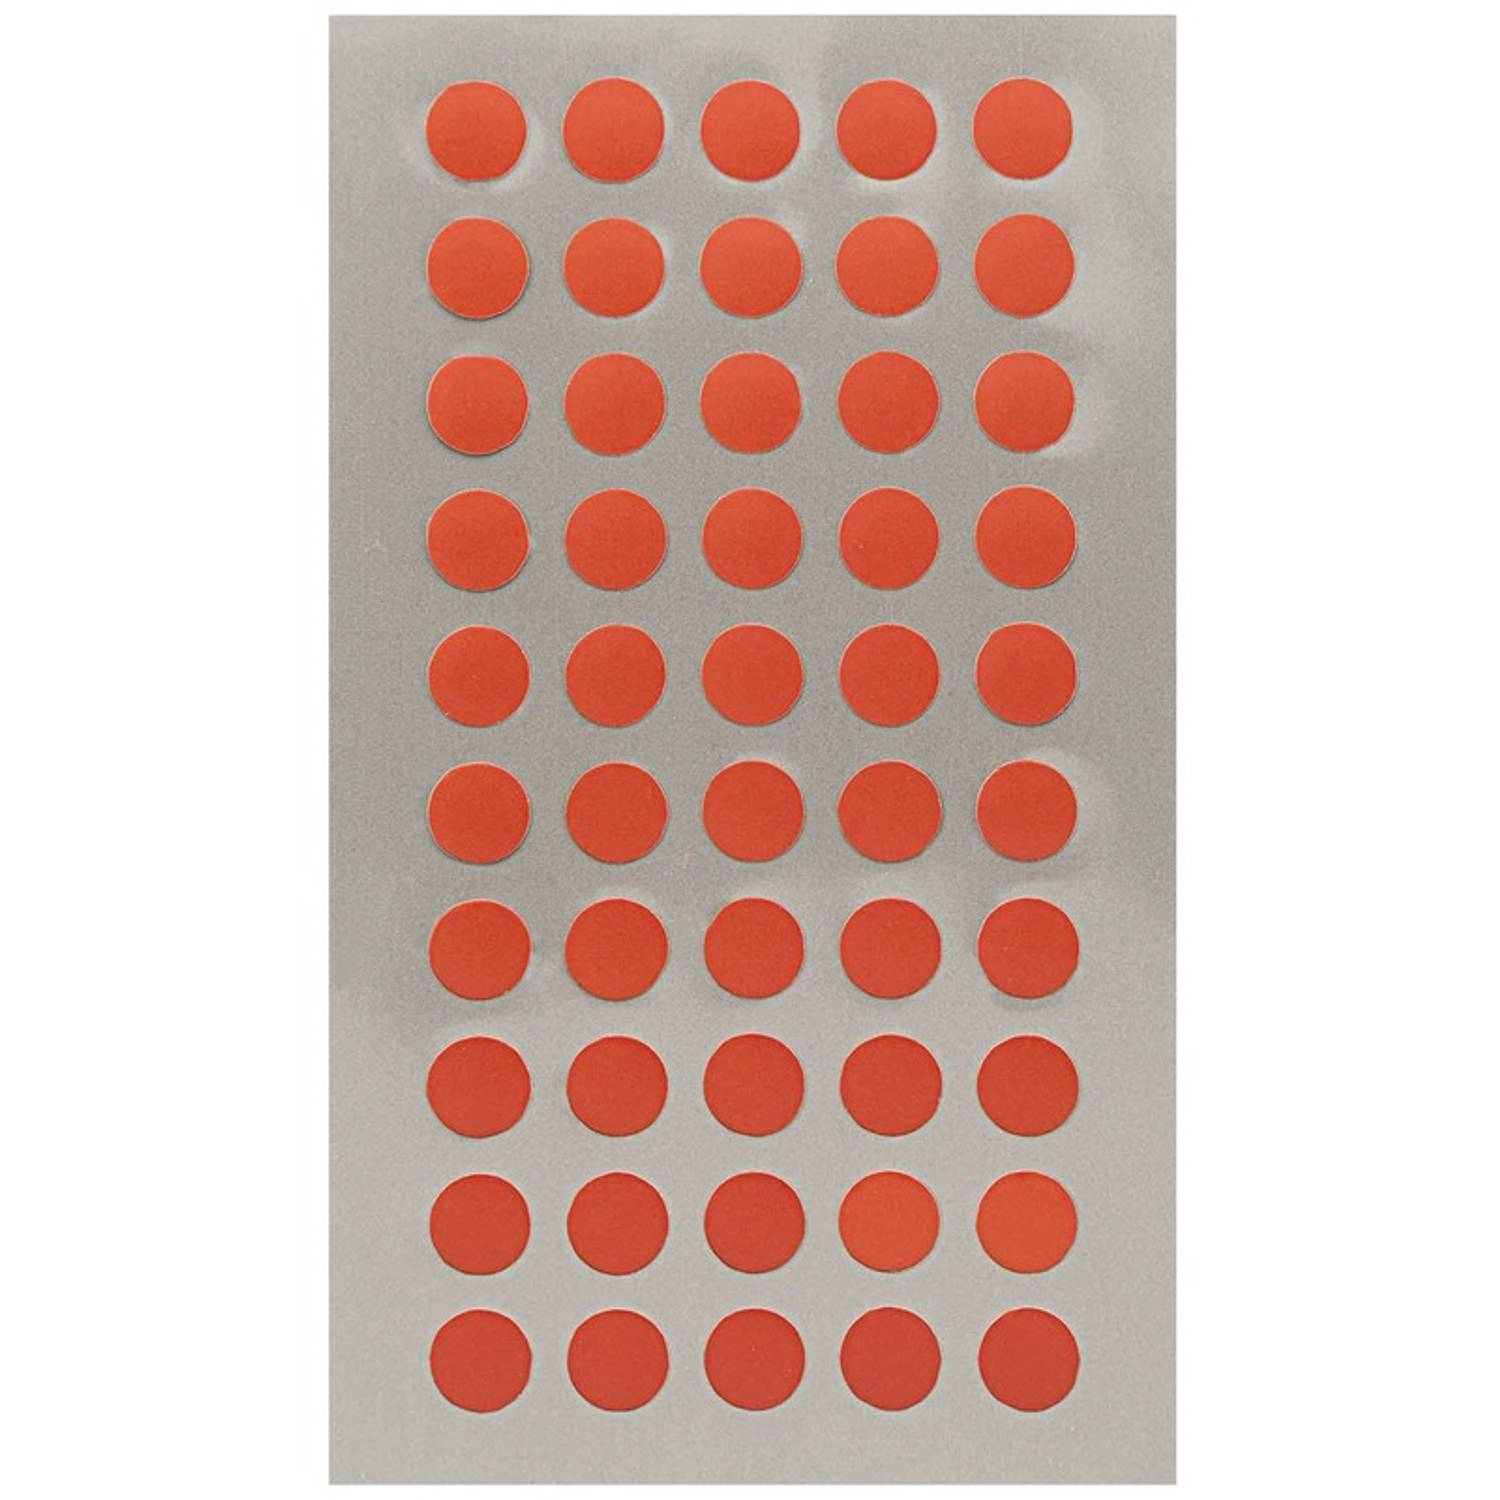 200x Stippen Stickers 8 Mm - Stickers - Rood